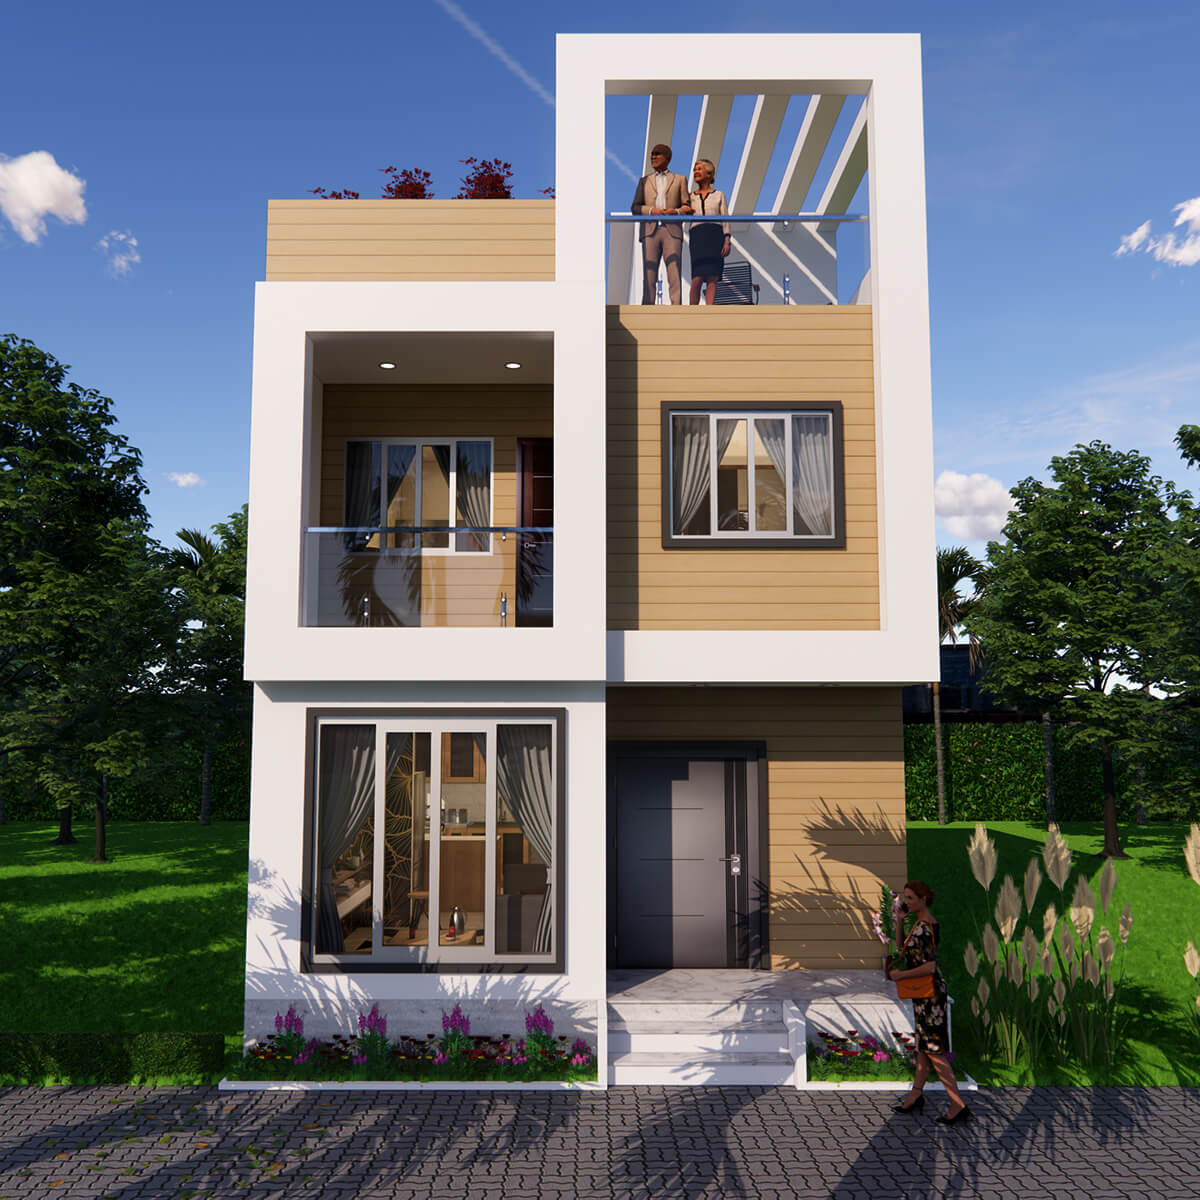 20×25 Feet Small Space House Design With 2 Bedroom – Kk Home Design Store